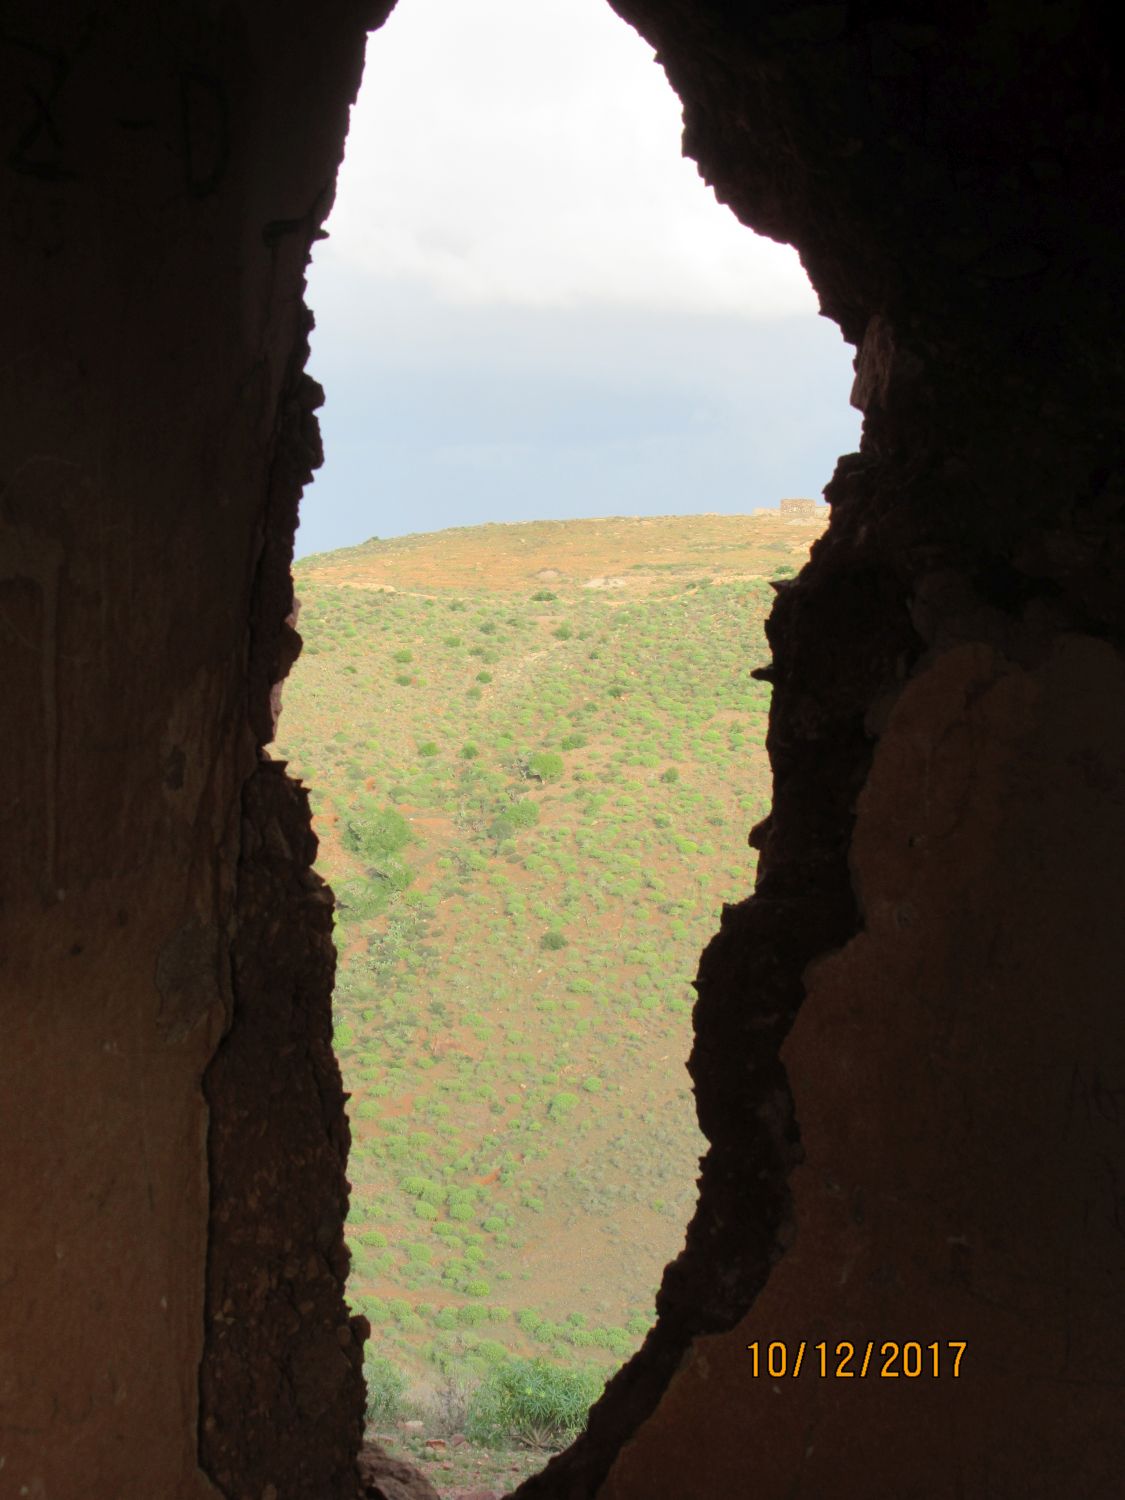 View through a hole in the wall.